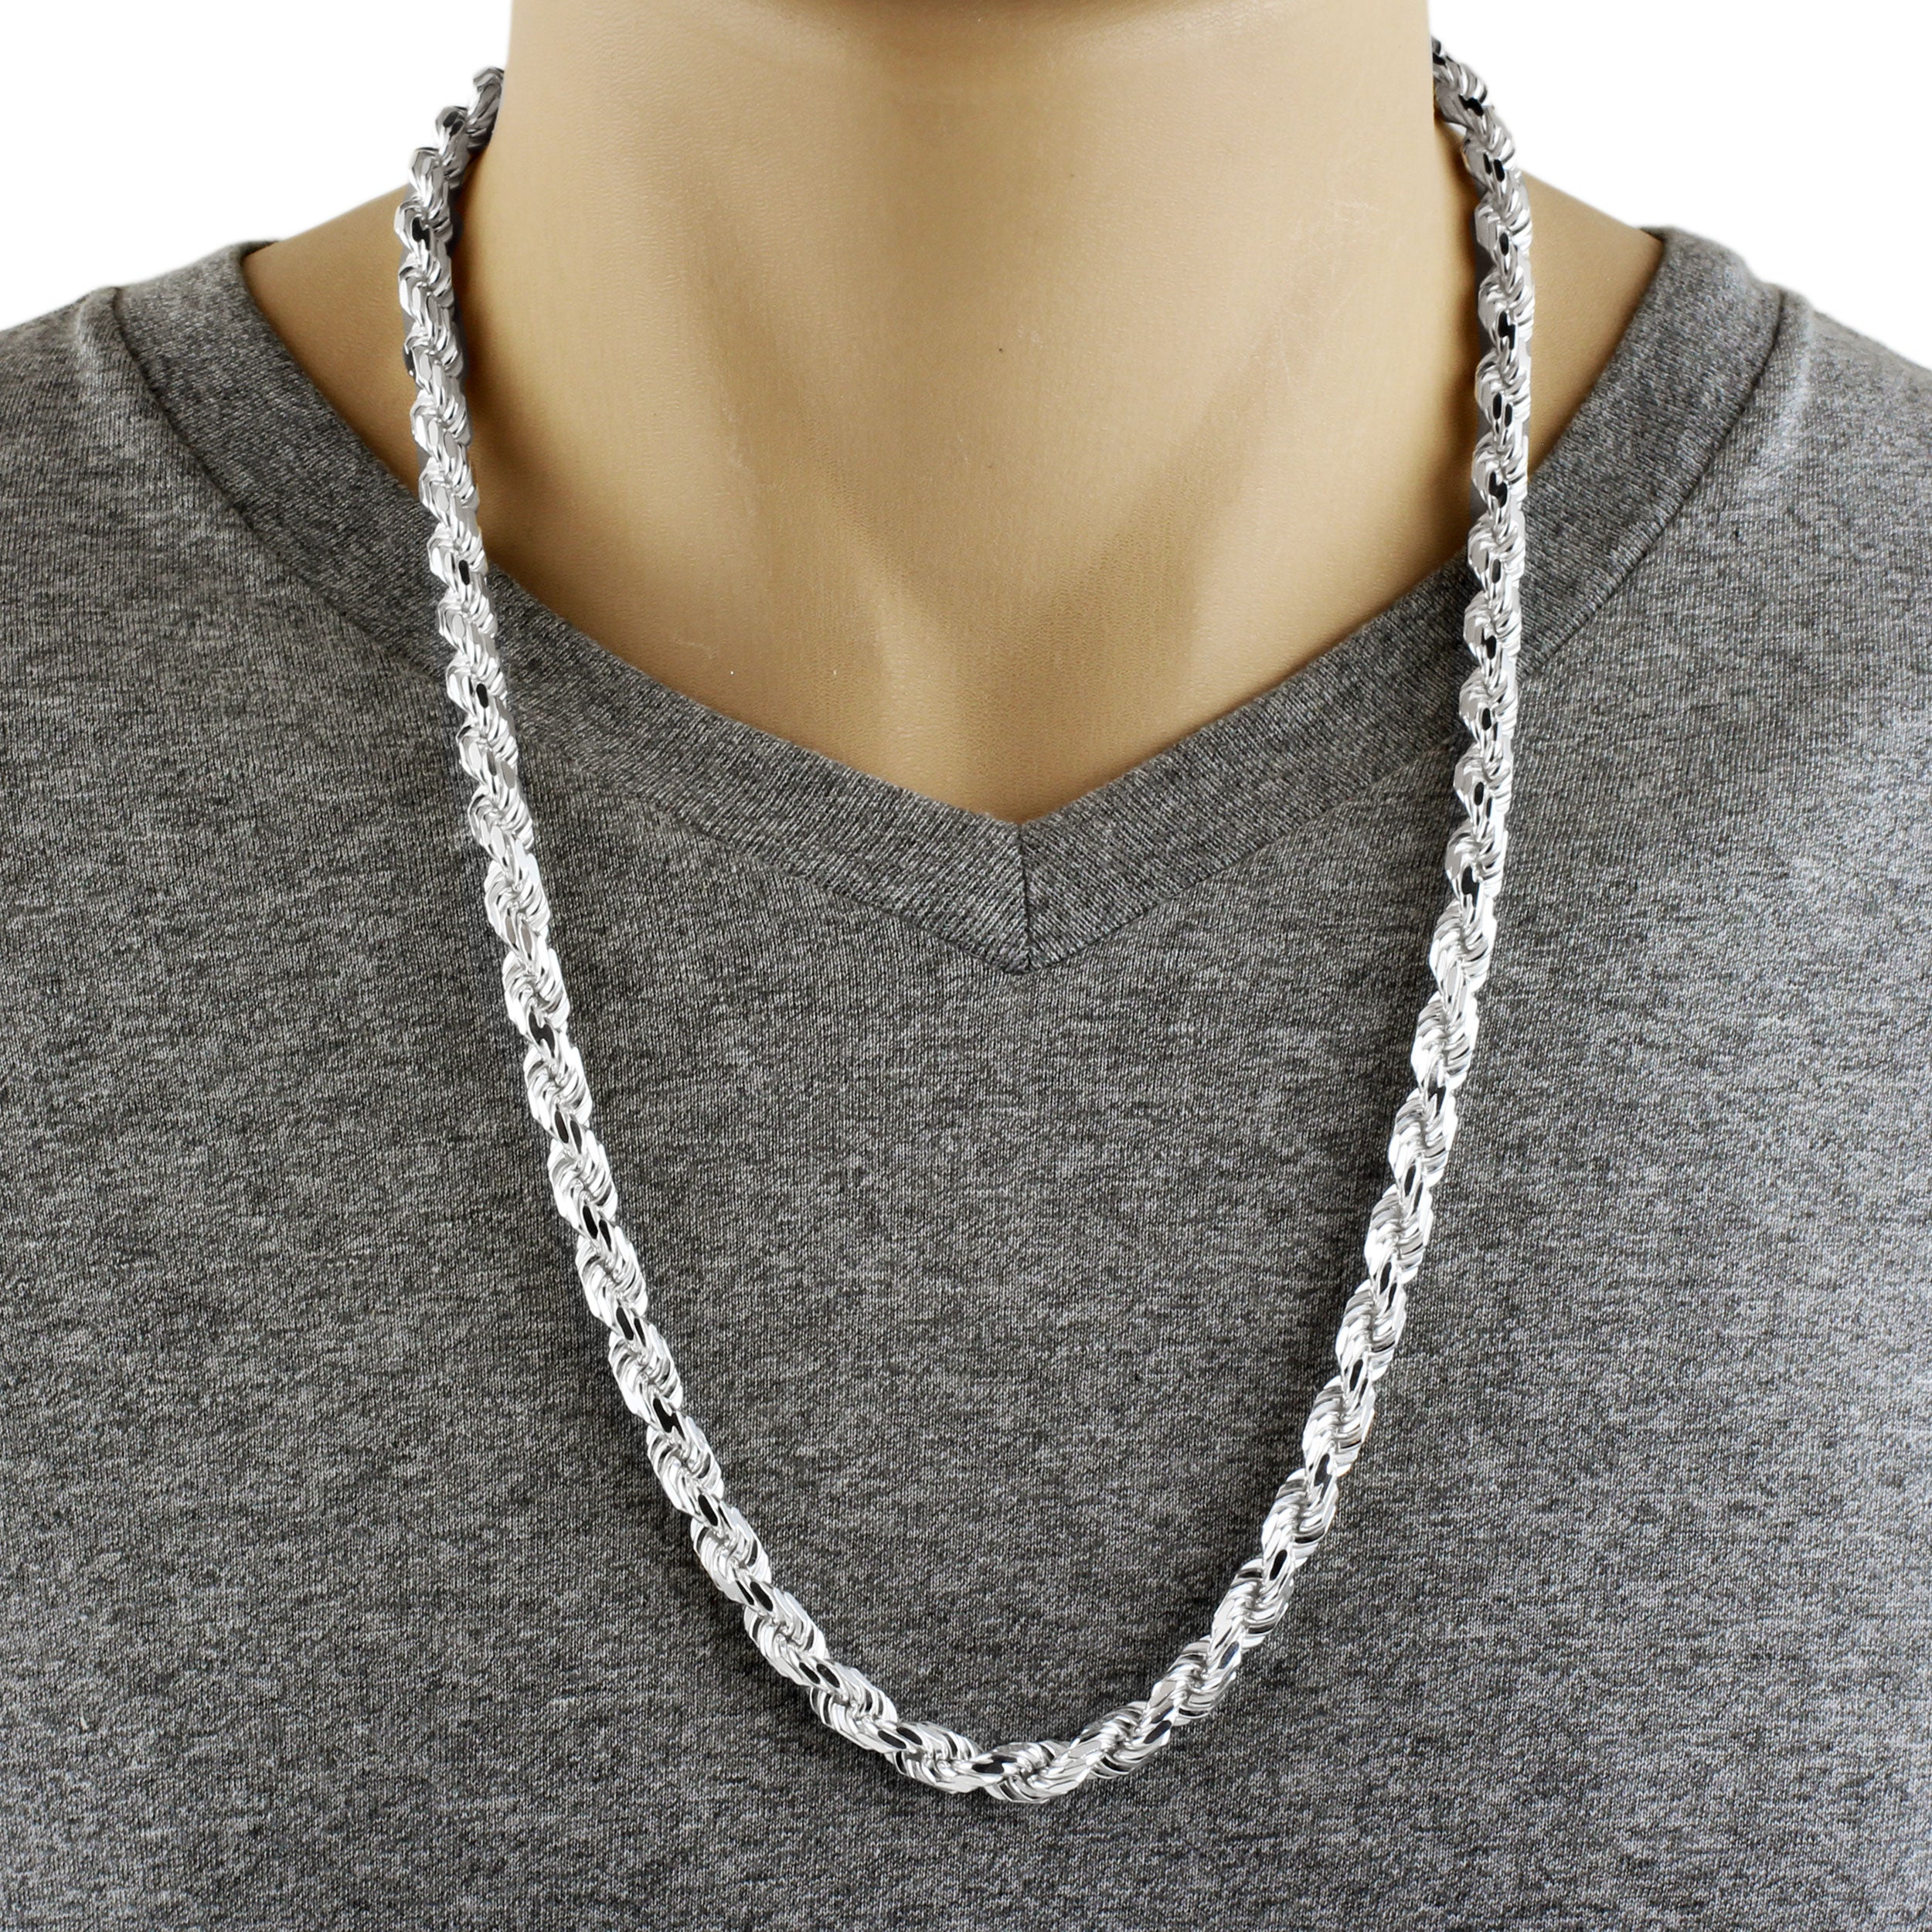 https://www.925express.com/cdn/shop/products/sterling-silver-925-diamond-cut-7mm-ropechain-necklace-wholesale-sterling-silver-jewelry-shirt-photo.jpg?v=1654450570